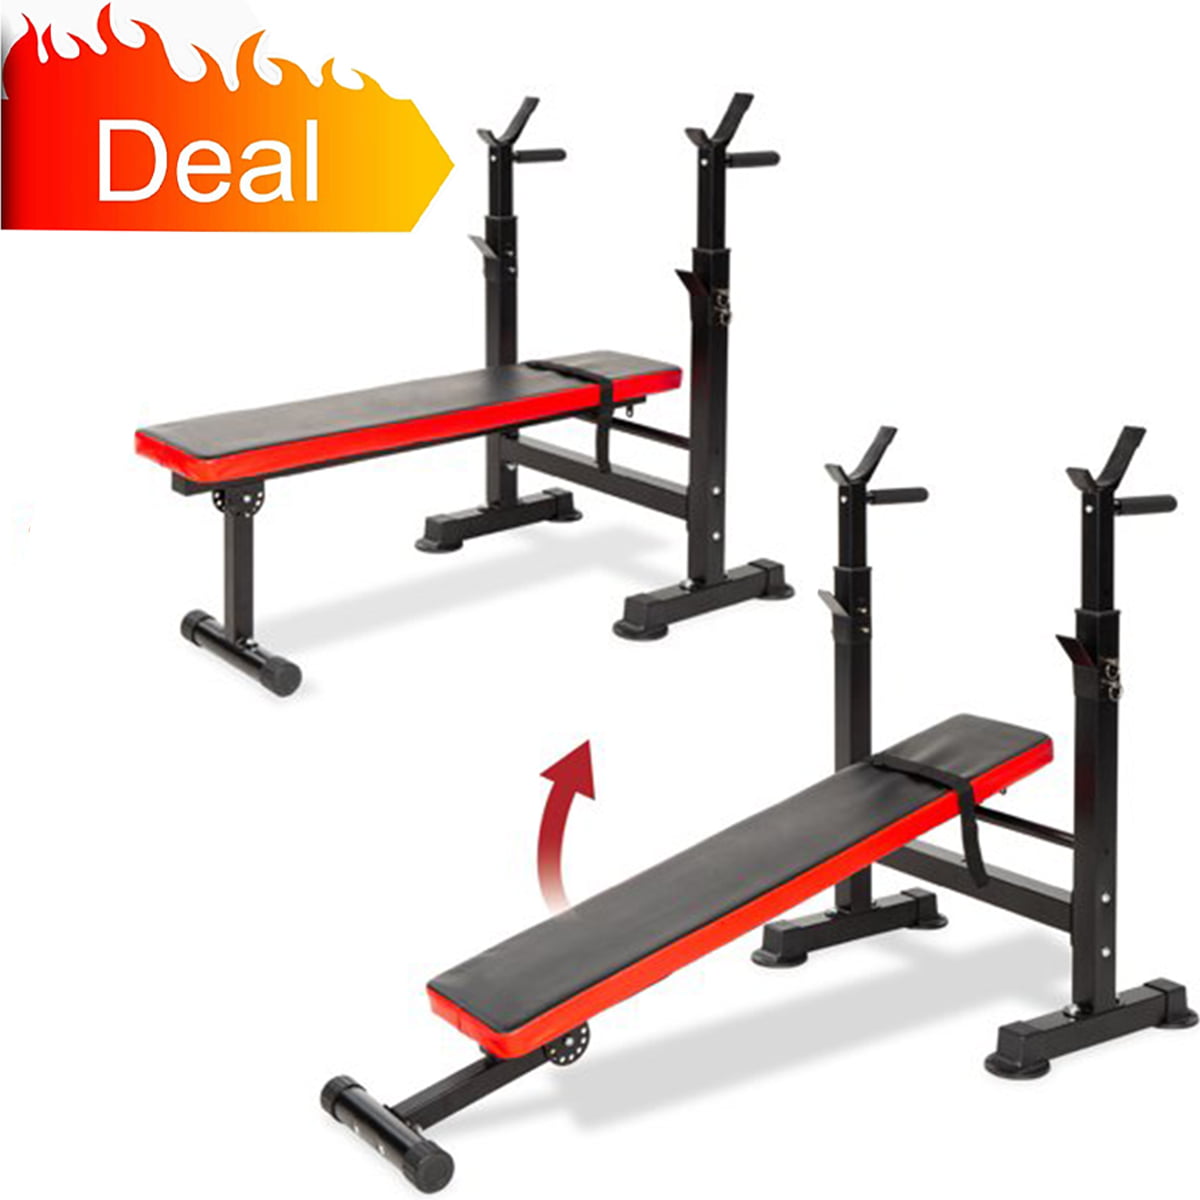 ADJUSTABLE LIFTING WEIGHT BENCH SET Weight Bench Barbell Lifting Press Gym 